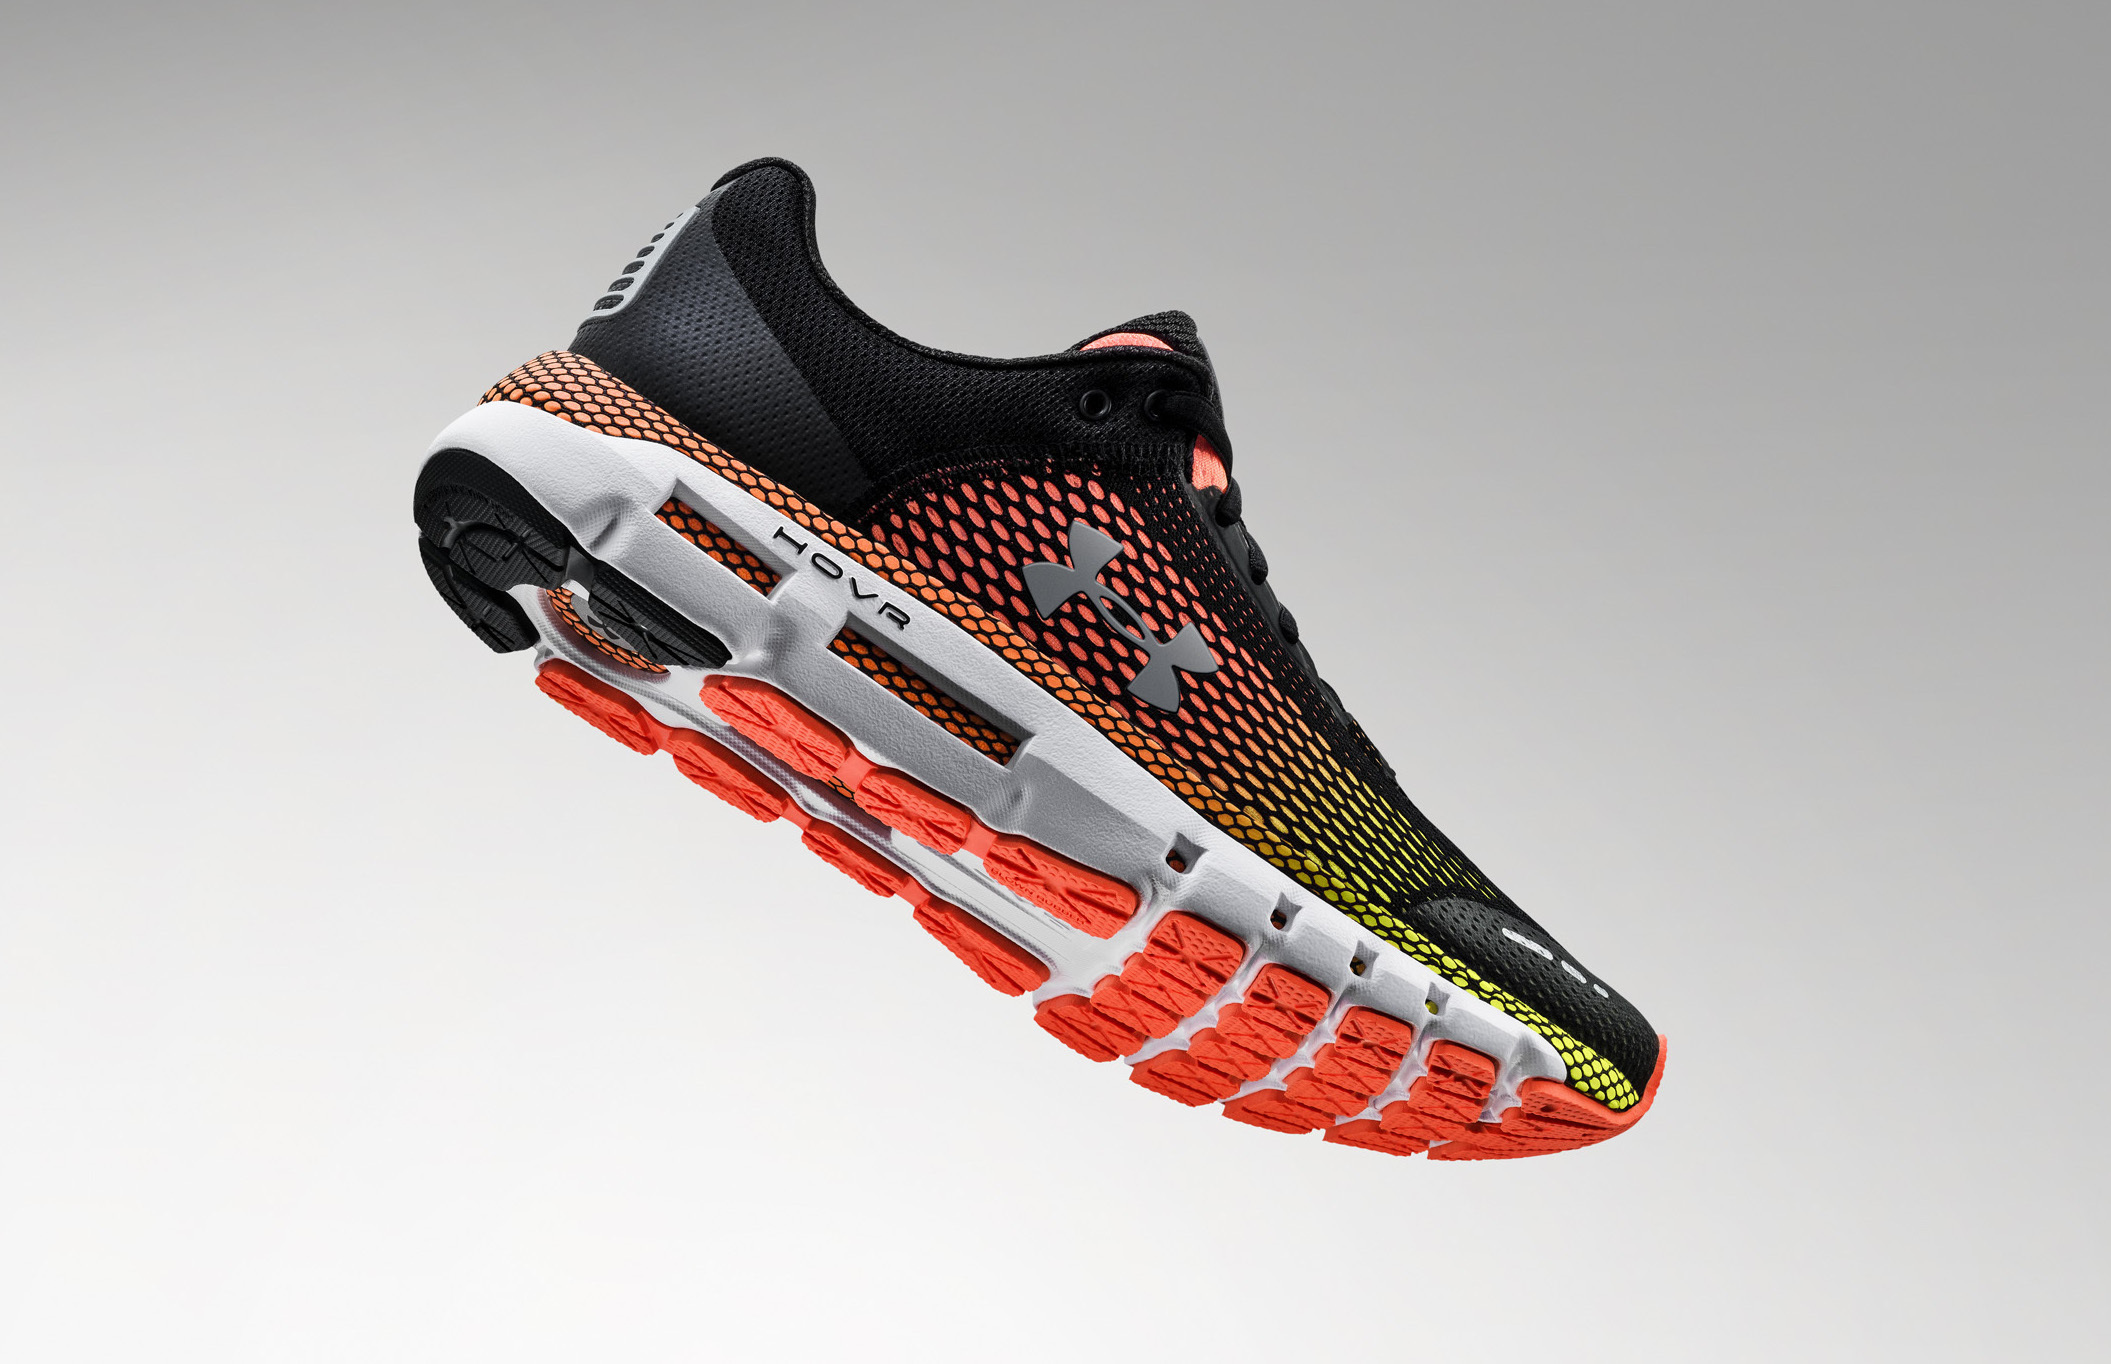 Under Armour's connected running shoes 